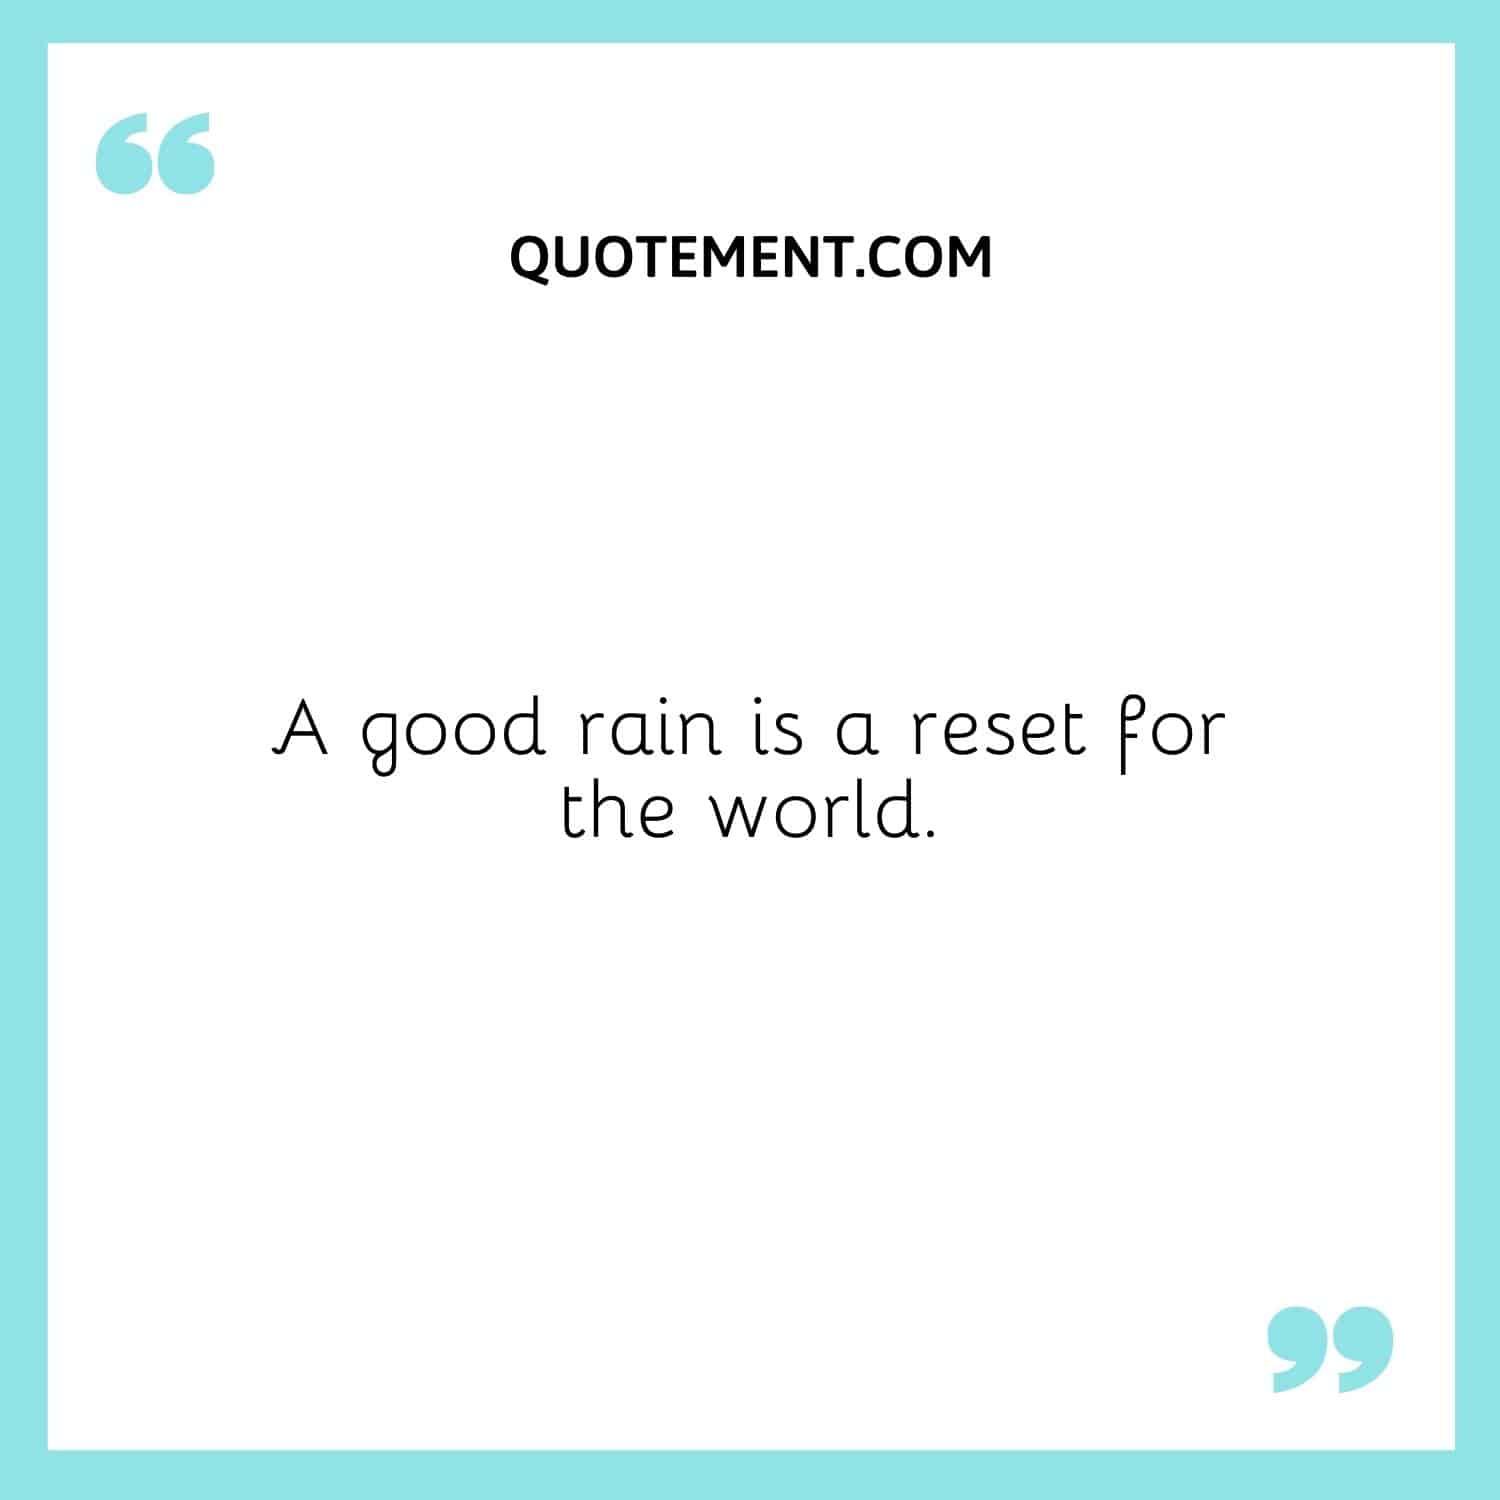 A good rain is a reset for the world.